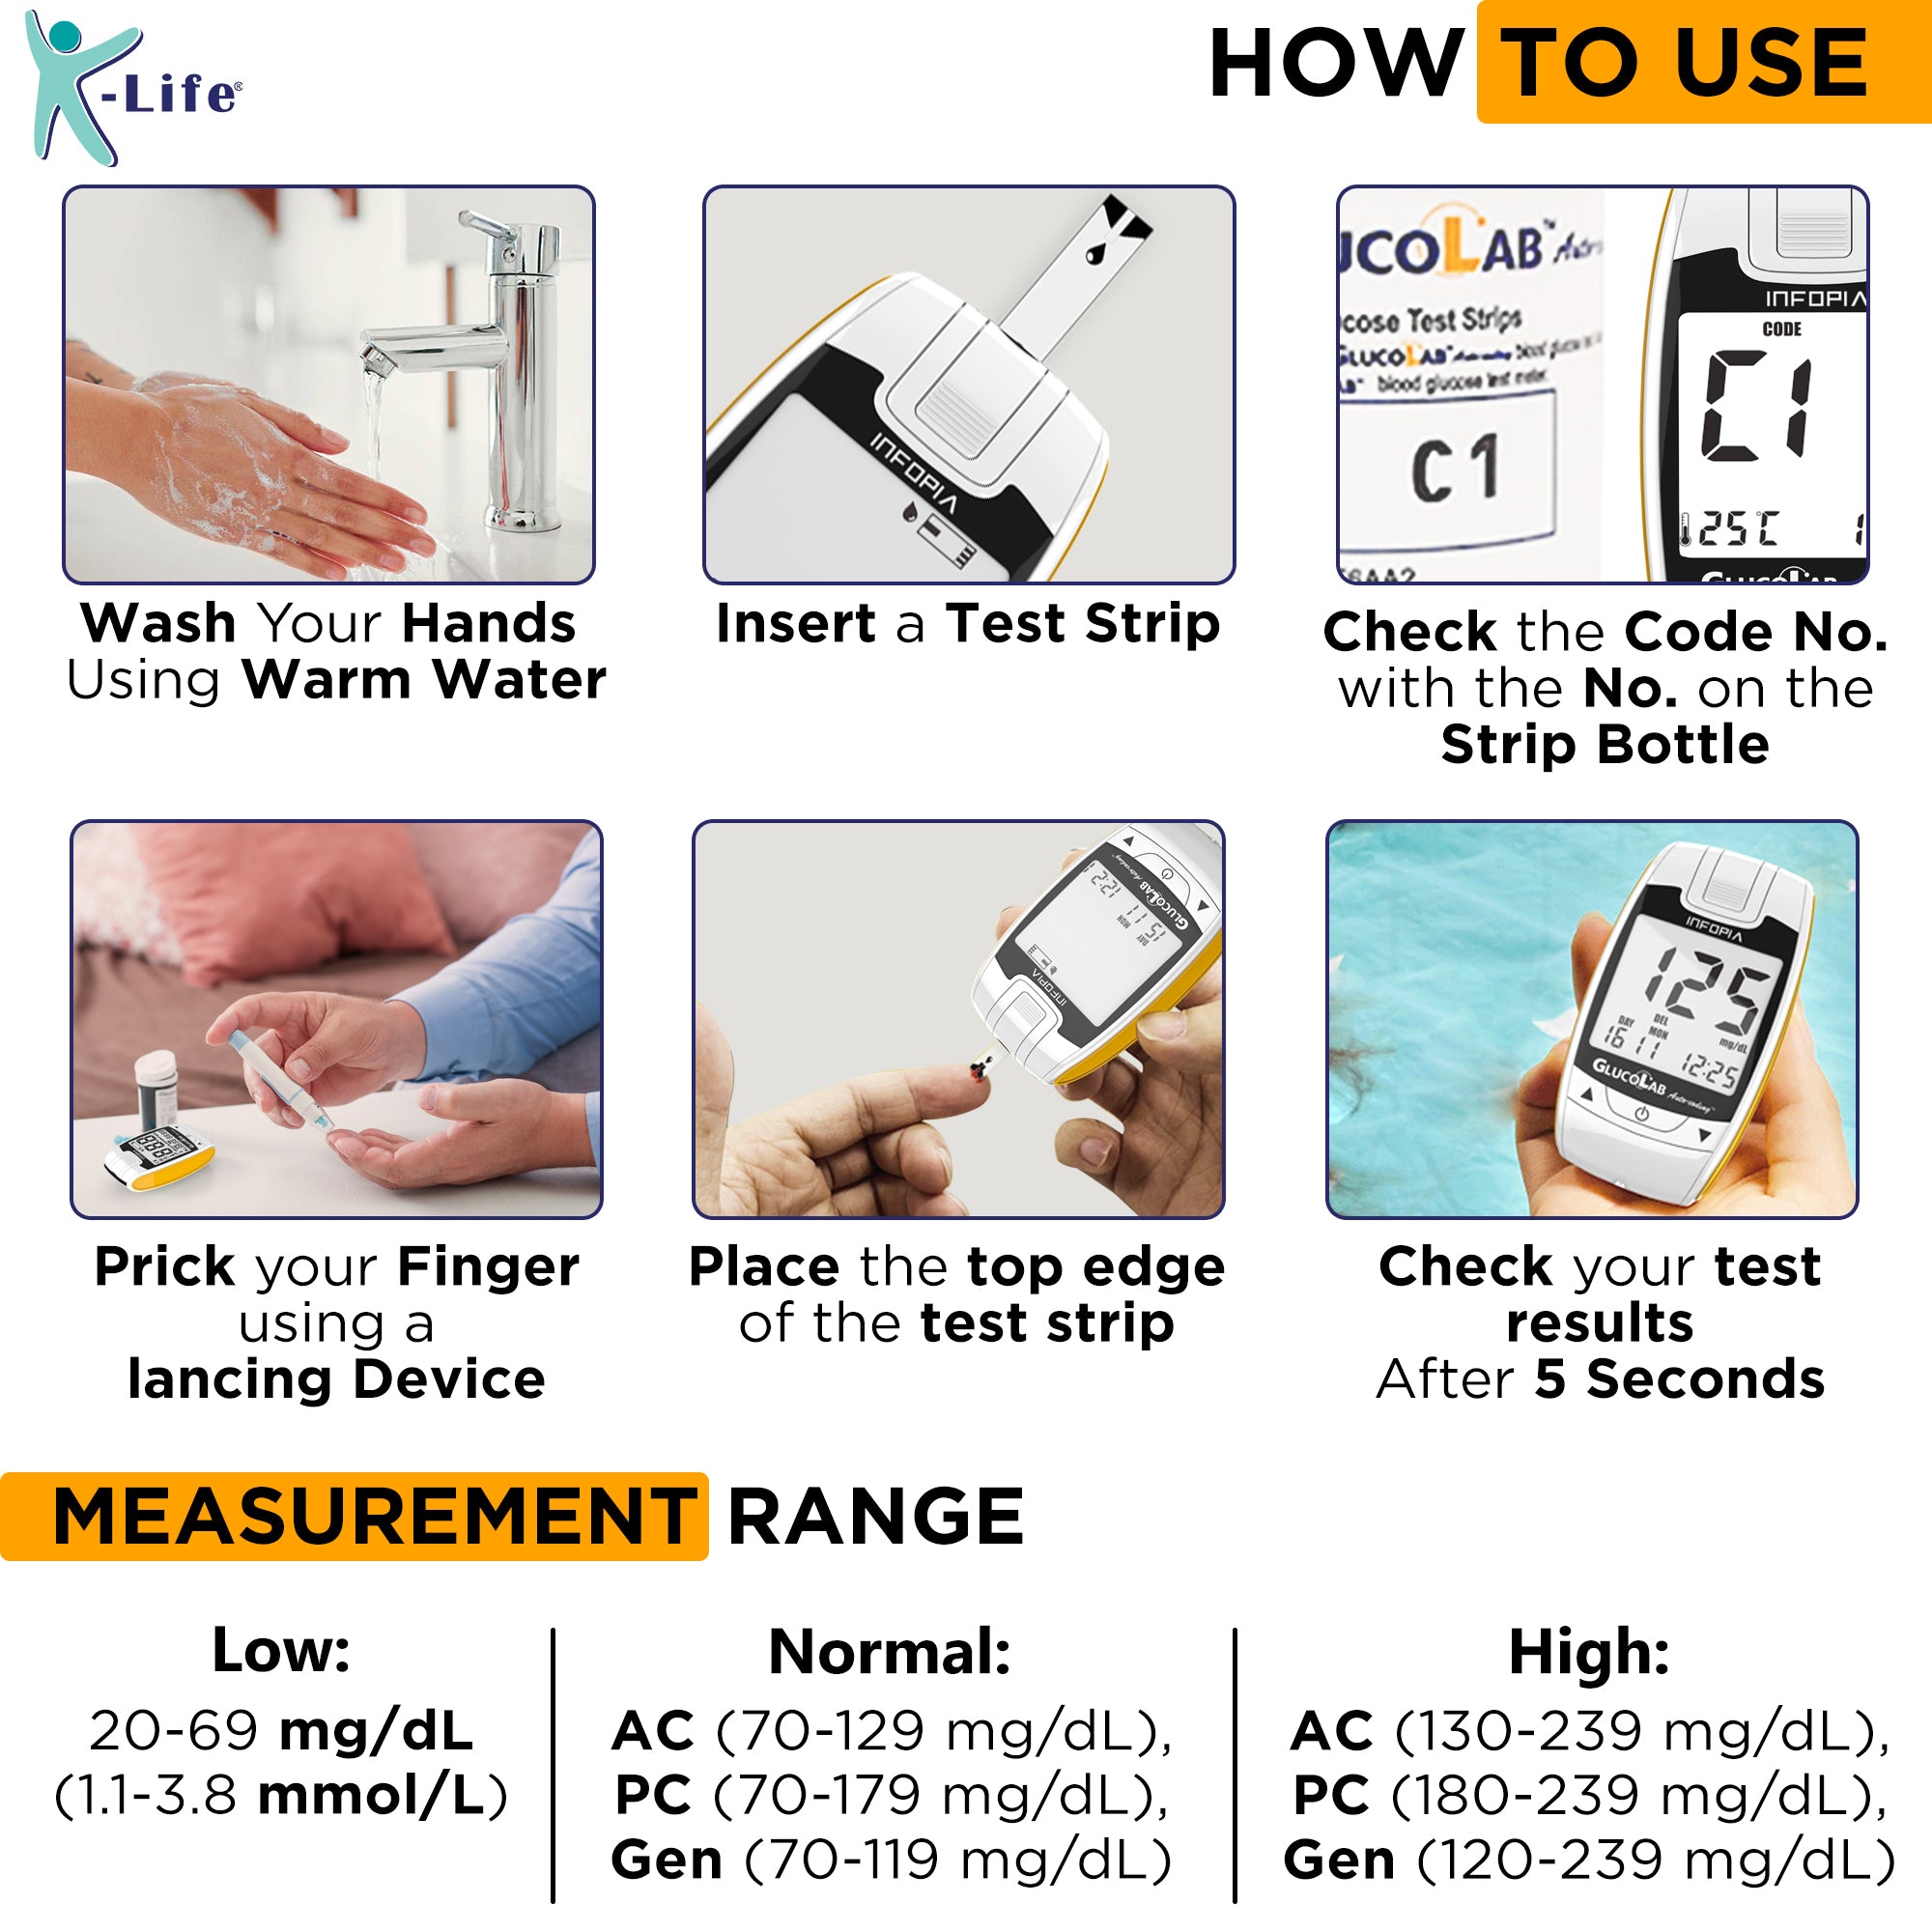 K-Life Gluco lab Fully Automatic Blood Glucose Sugar Testing Machine with 25 Strips (White)